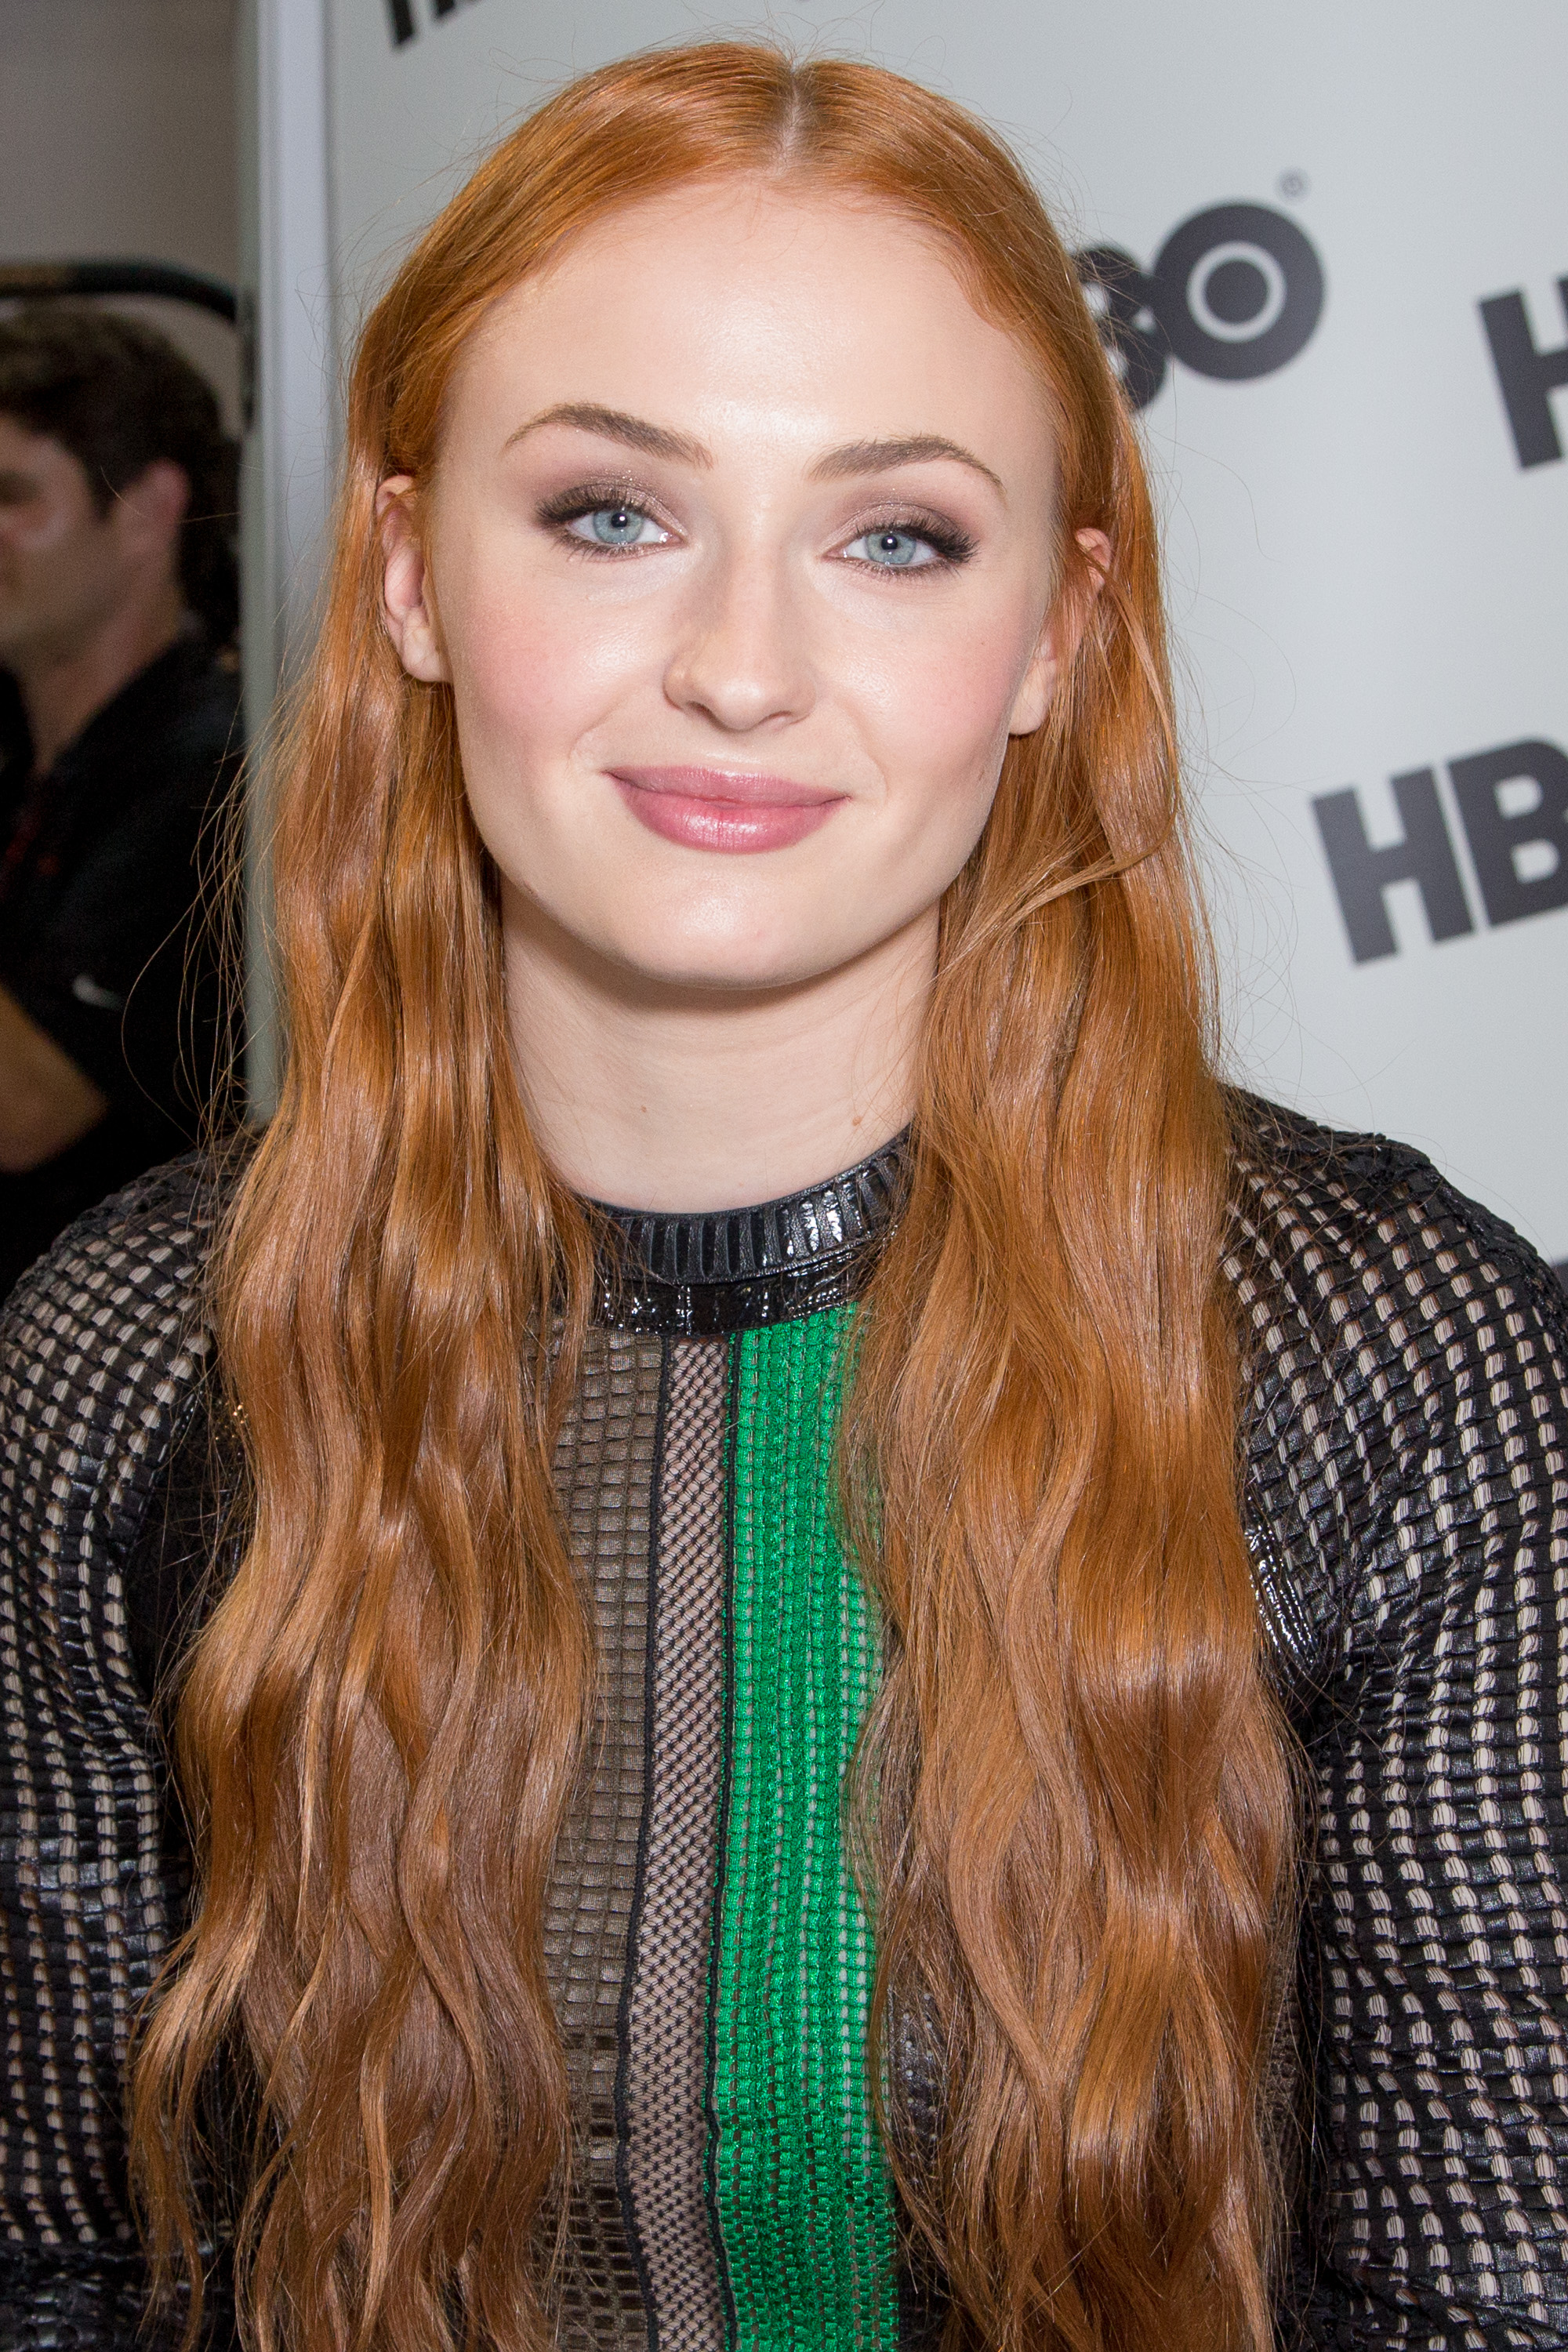 Actress Sophie Turner attends a fan signing for 'Game of Thrones' during Comic-Con International on July 10, 2015 in San Diego, California. (Chelsea Lauren — Getty Images)